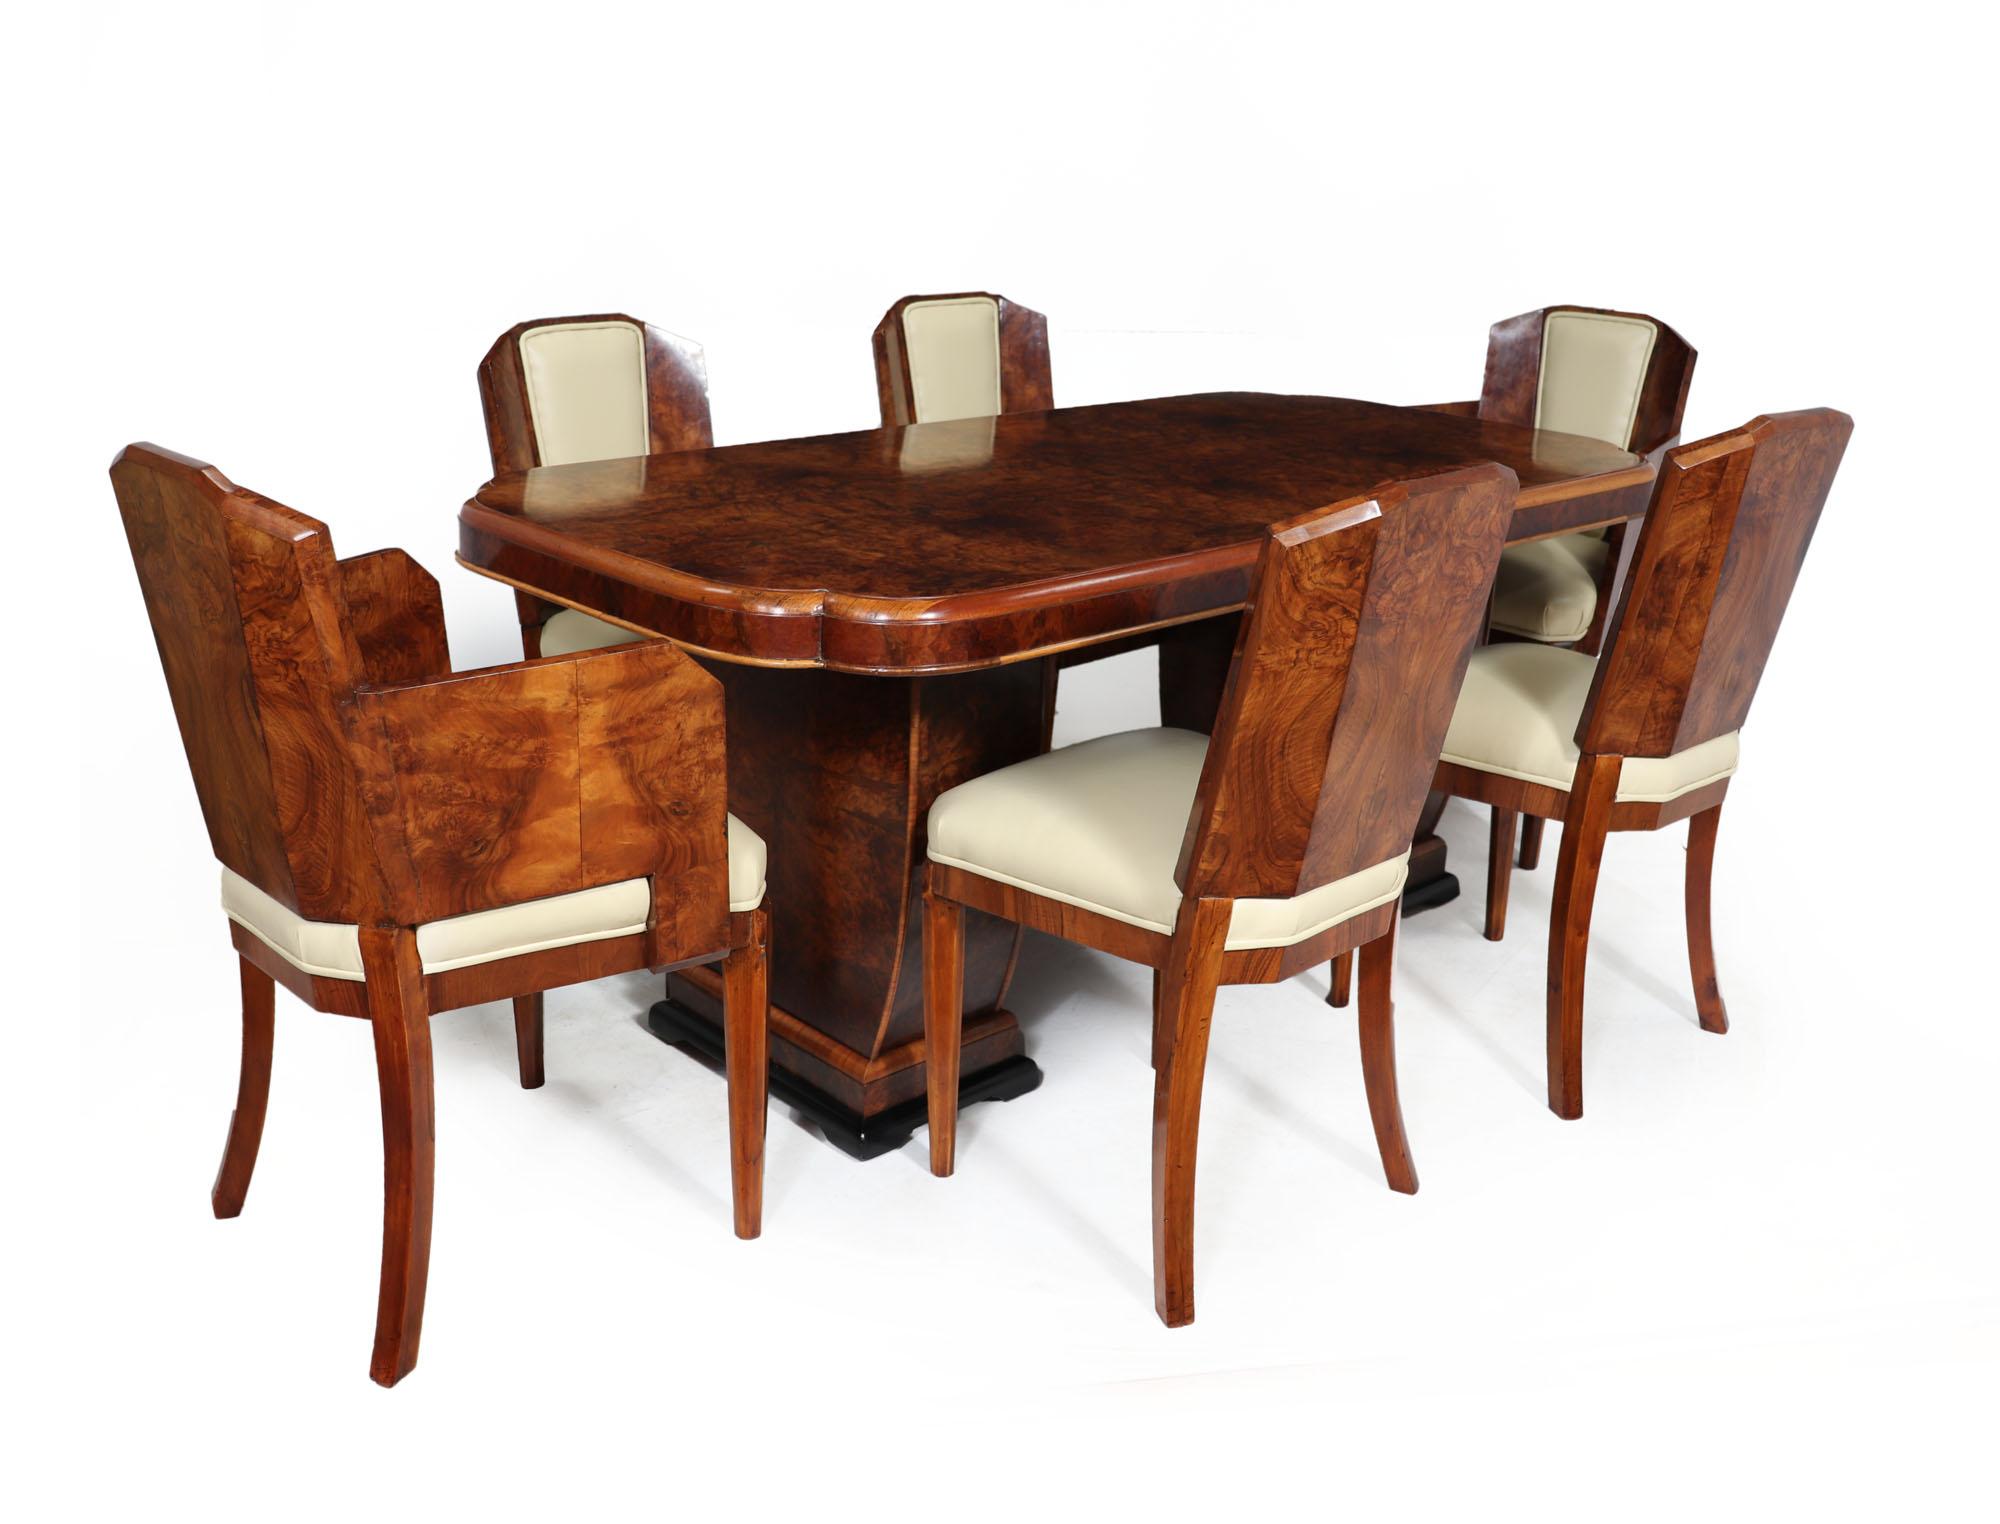 Mid-20th Century Art Deco Dining Table and Chairs by Hille